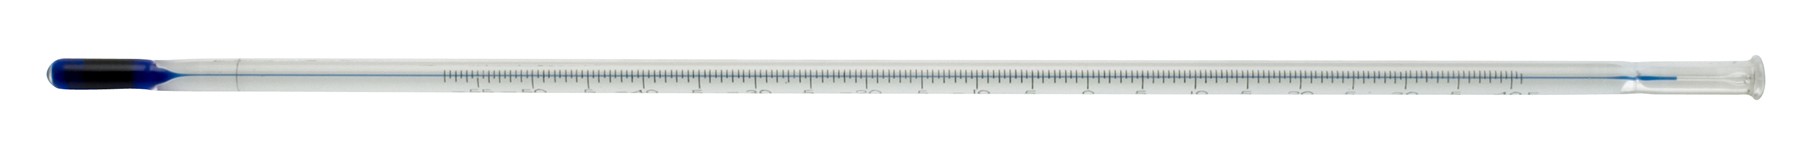 SP Bel-Art, H-B DURAC Plus ASTM Like Liquid-In-Glass Laboratory Thermometer, 89C / Solidification Point, 76mm Immersion, -20 to 10C, Organic Liquid Fill